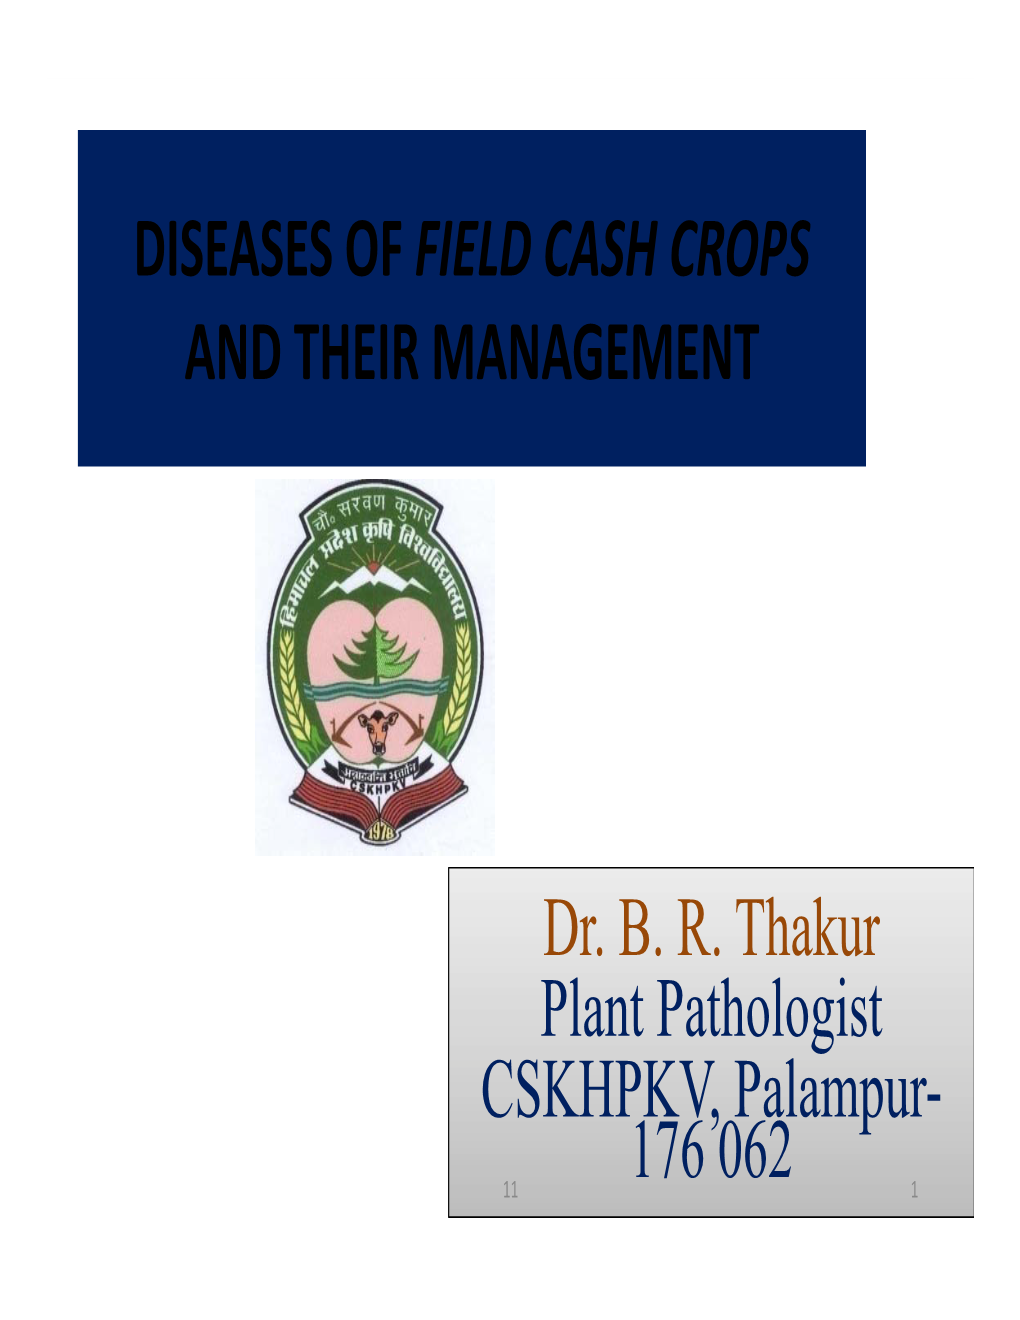 Diseases of Field Cash Crops and Their Management